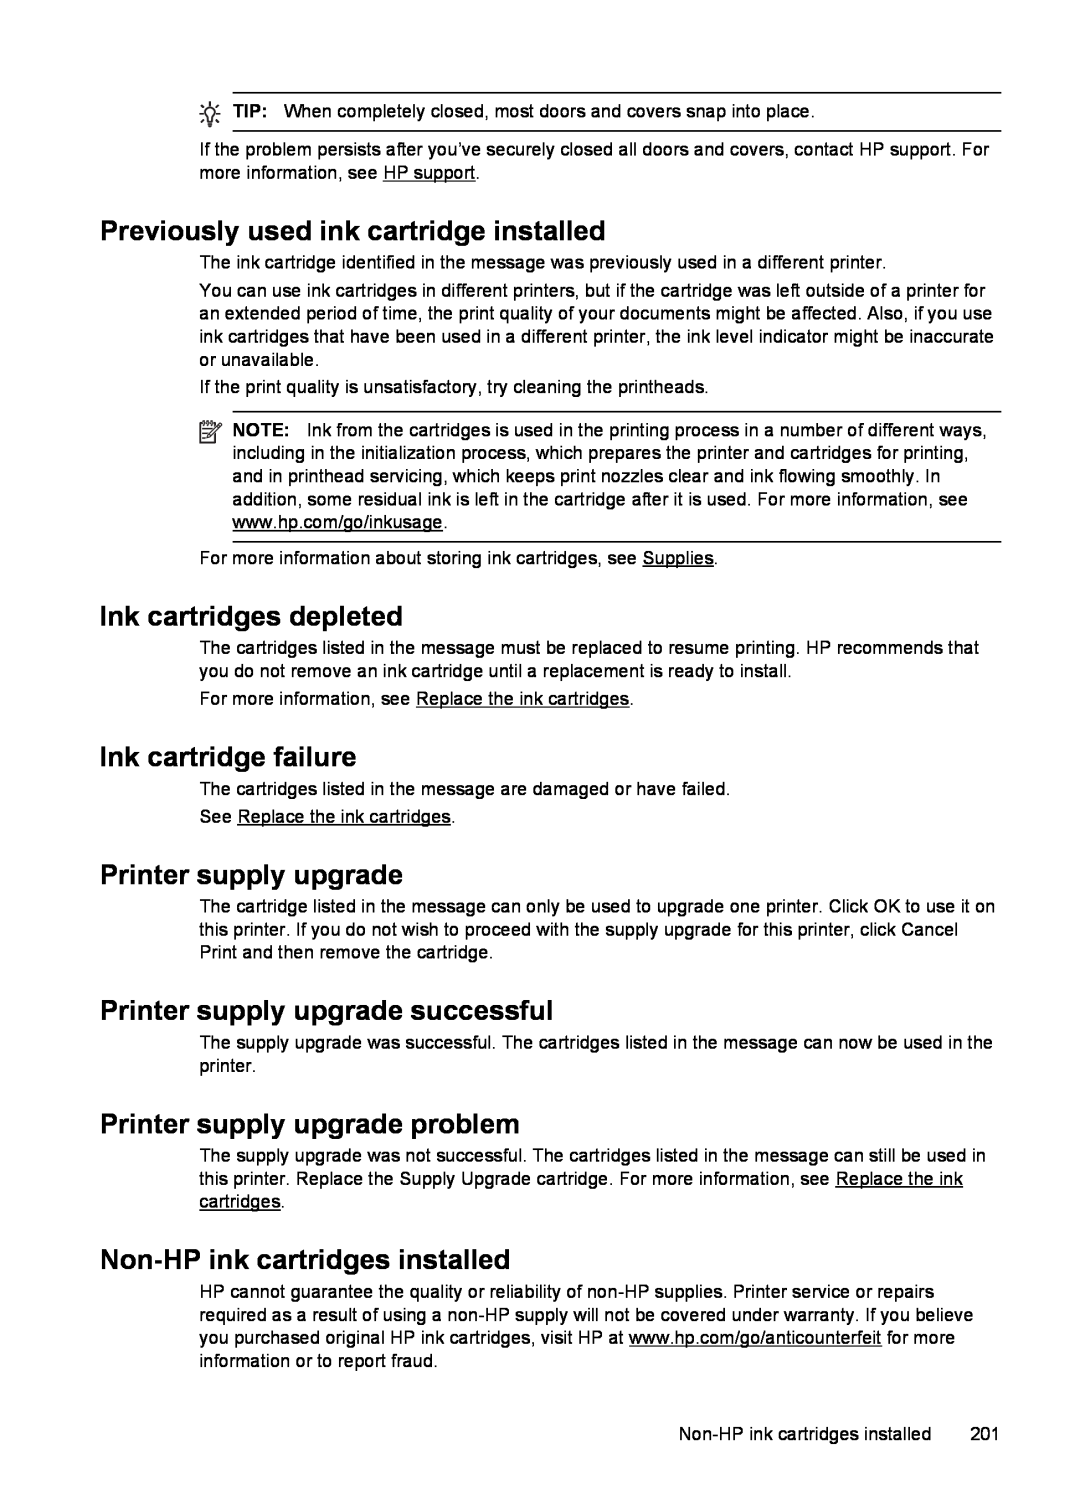 HP 6600 - H7 manual Previously used ink cartridge installed, Ink cartridges depleted, Ink cartridge failure 